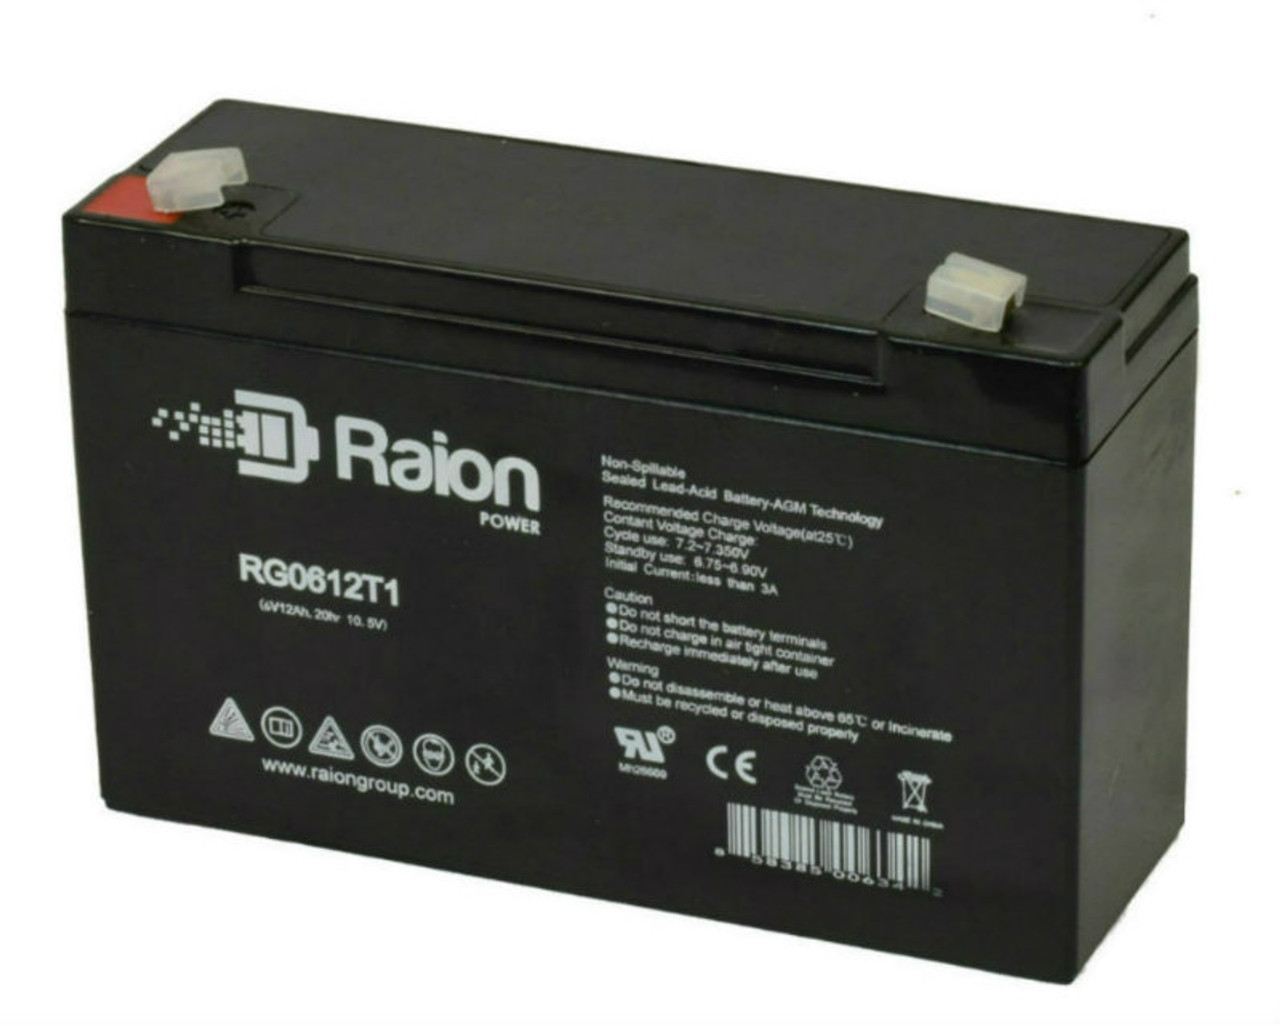 Raion Power RG06120T1 Replacement Emergency Light Battery for Siltron PEA6V8